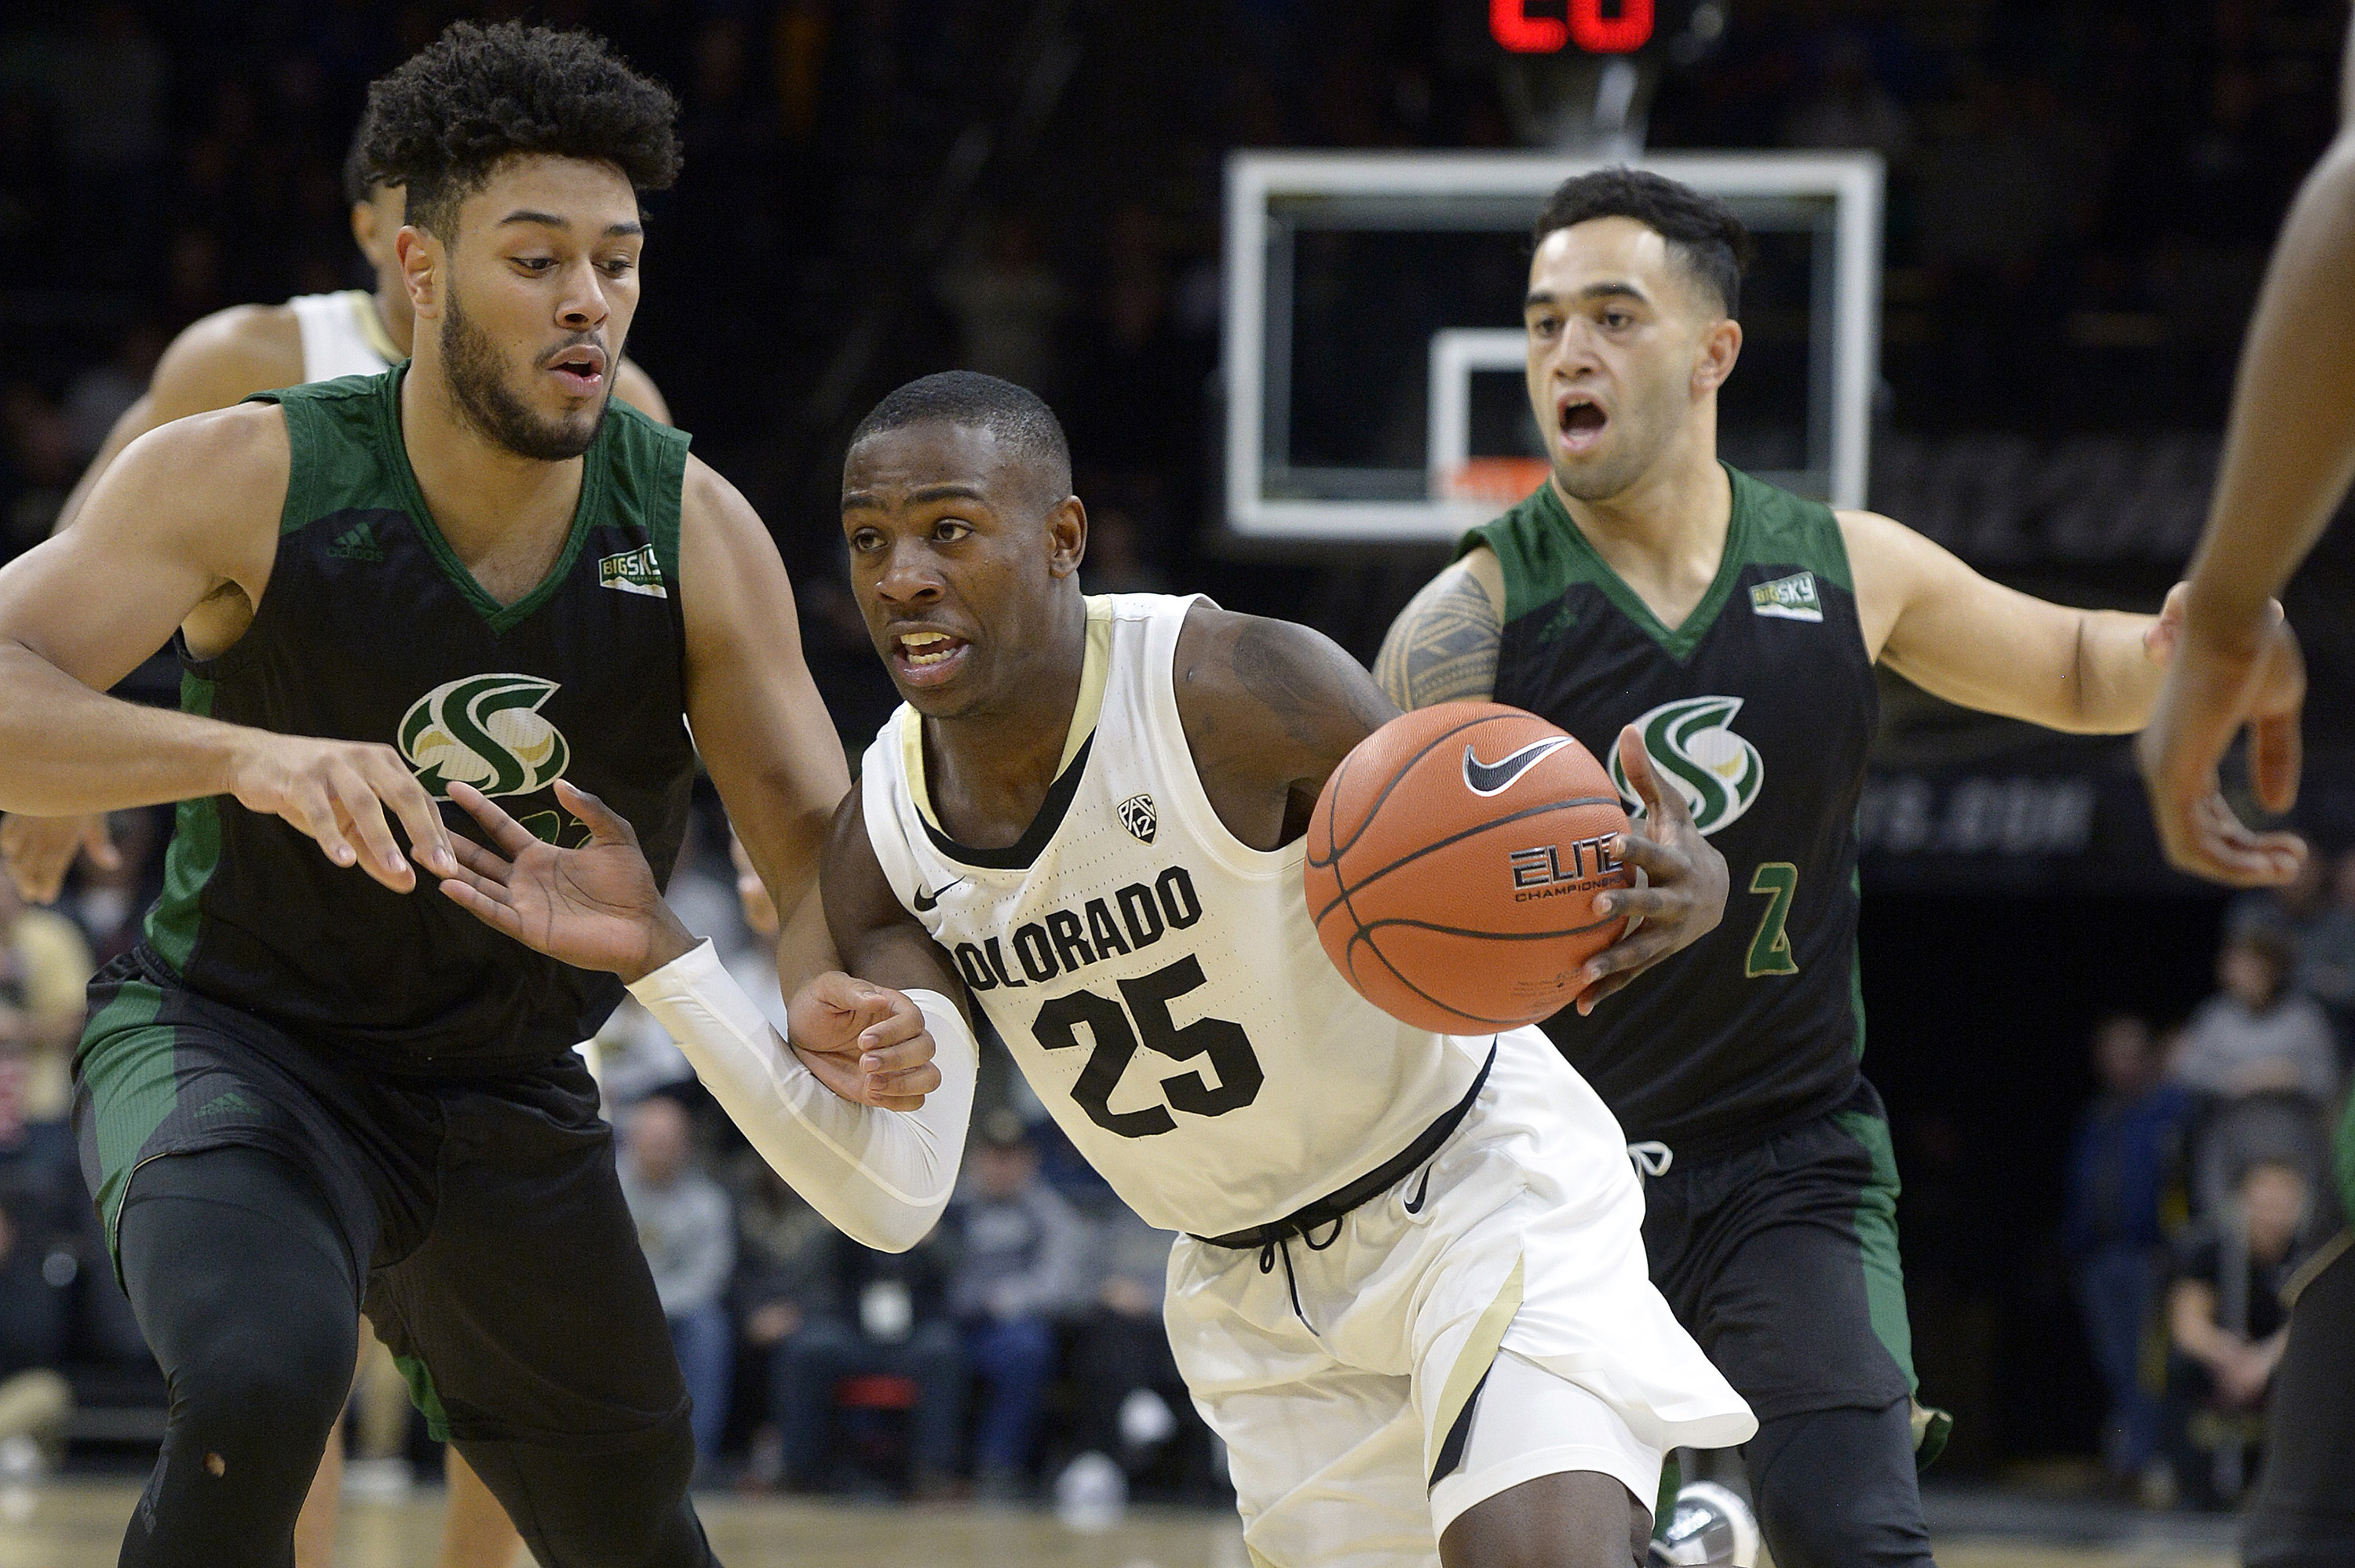 Bey leads No. 21 Colorado past Sac State 59-45